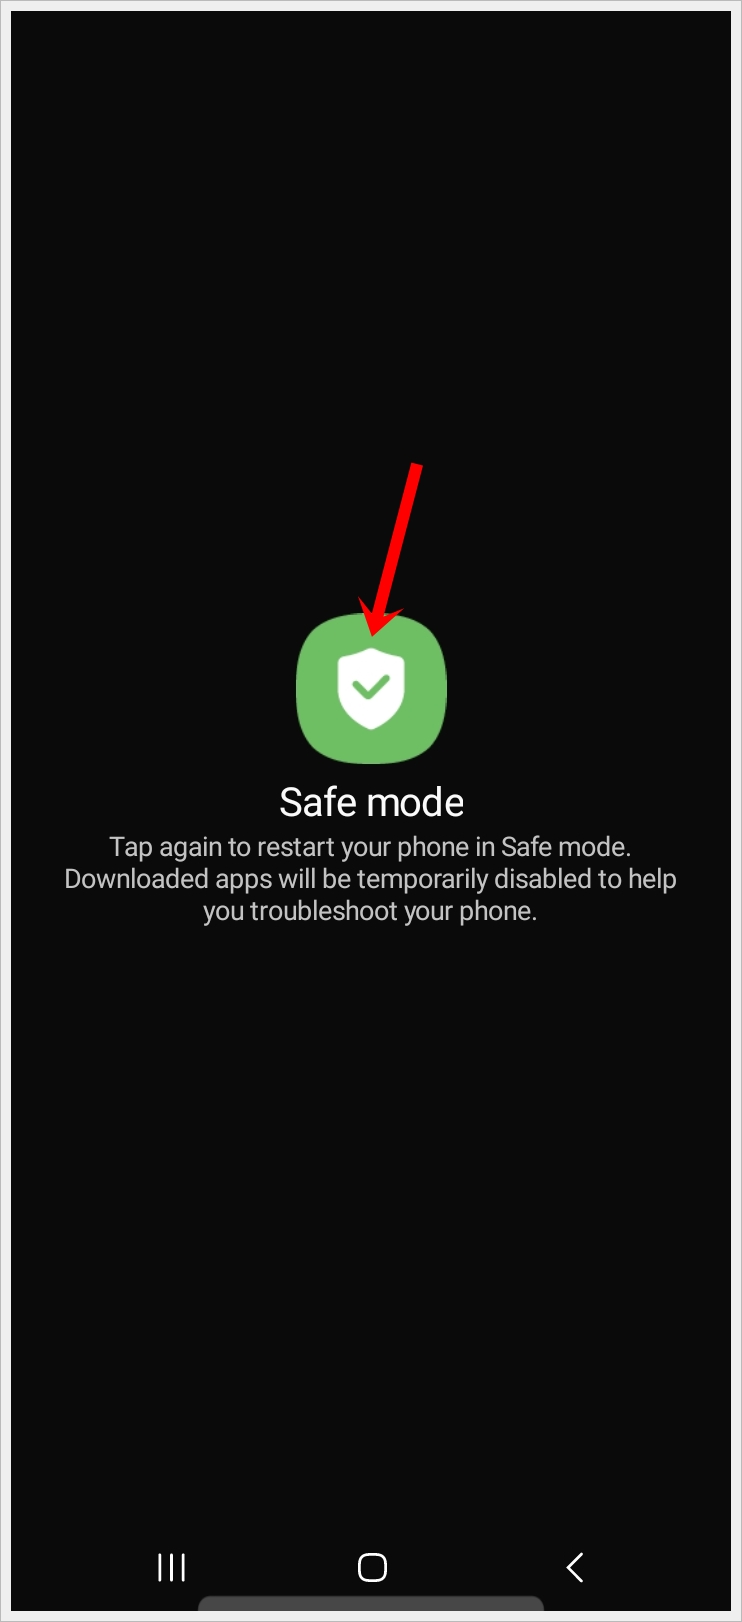 How to Enable or Disable Safe Mode on Your Android Phone: This image shows a screenshot from a Samsung phone. It features the 'Safe Mode' button being highlighted.